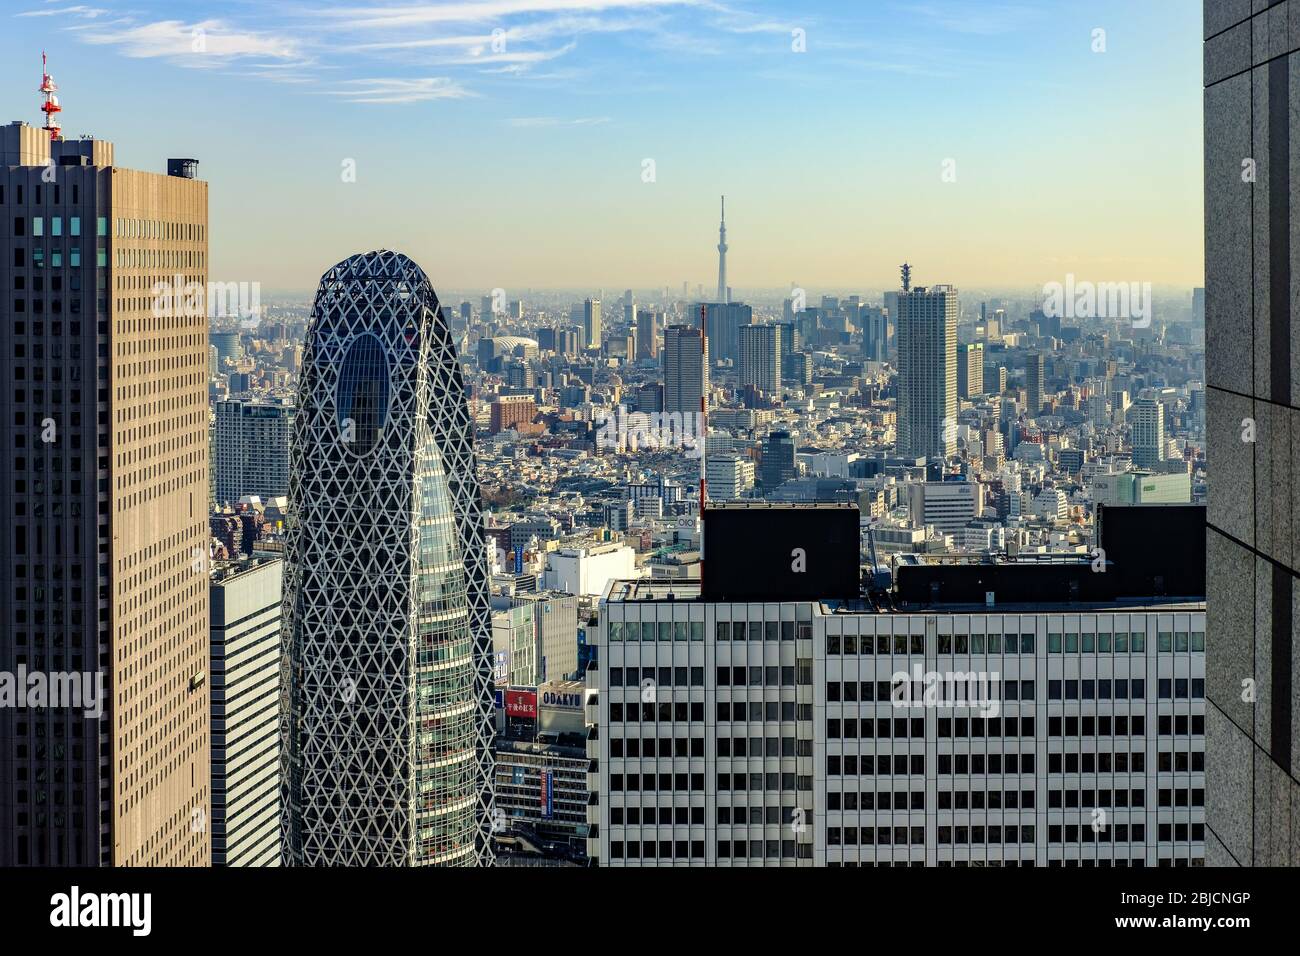 TOKYO, JAPAN - JANUARY 16 2019: A high view of Tokyo from the observatory deck, Tokyo Metropolitan Government Building, Shinjuku district high view, T Stock Photo